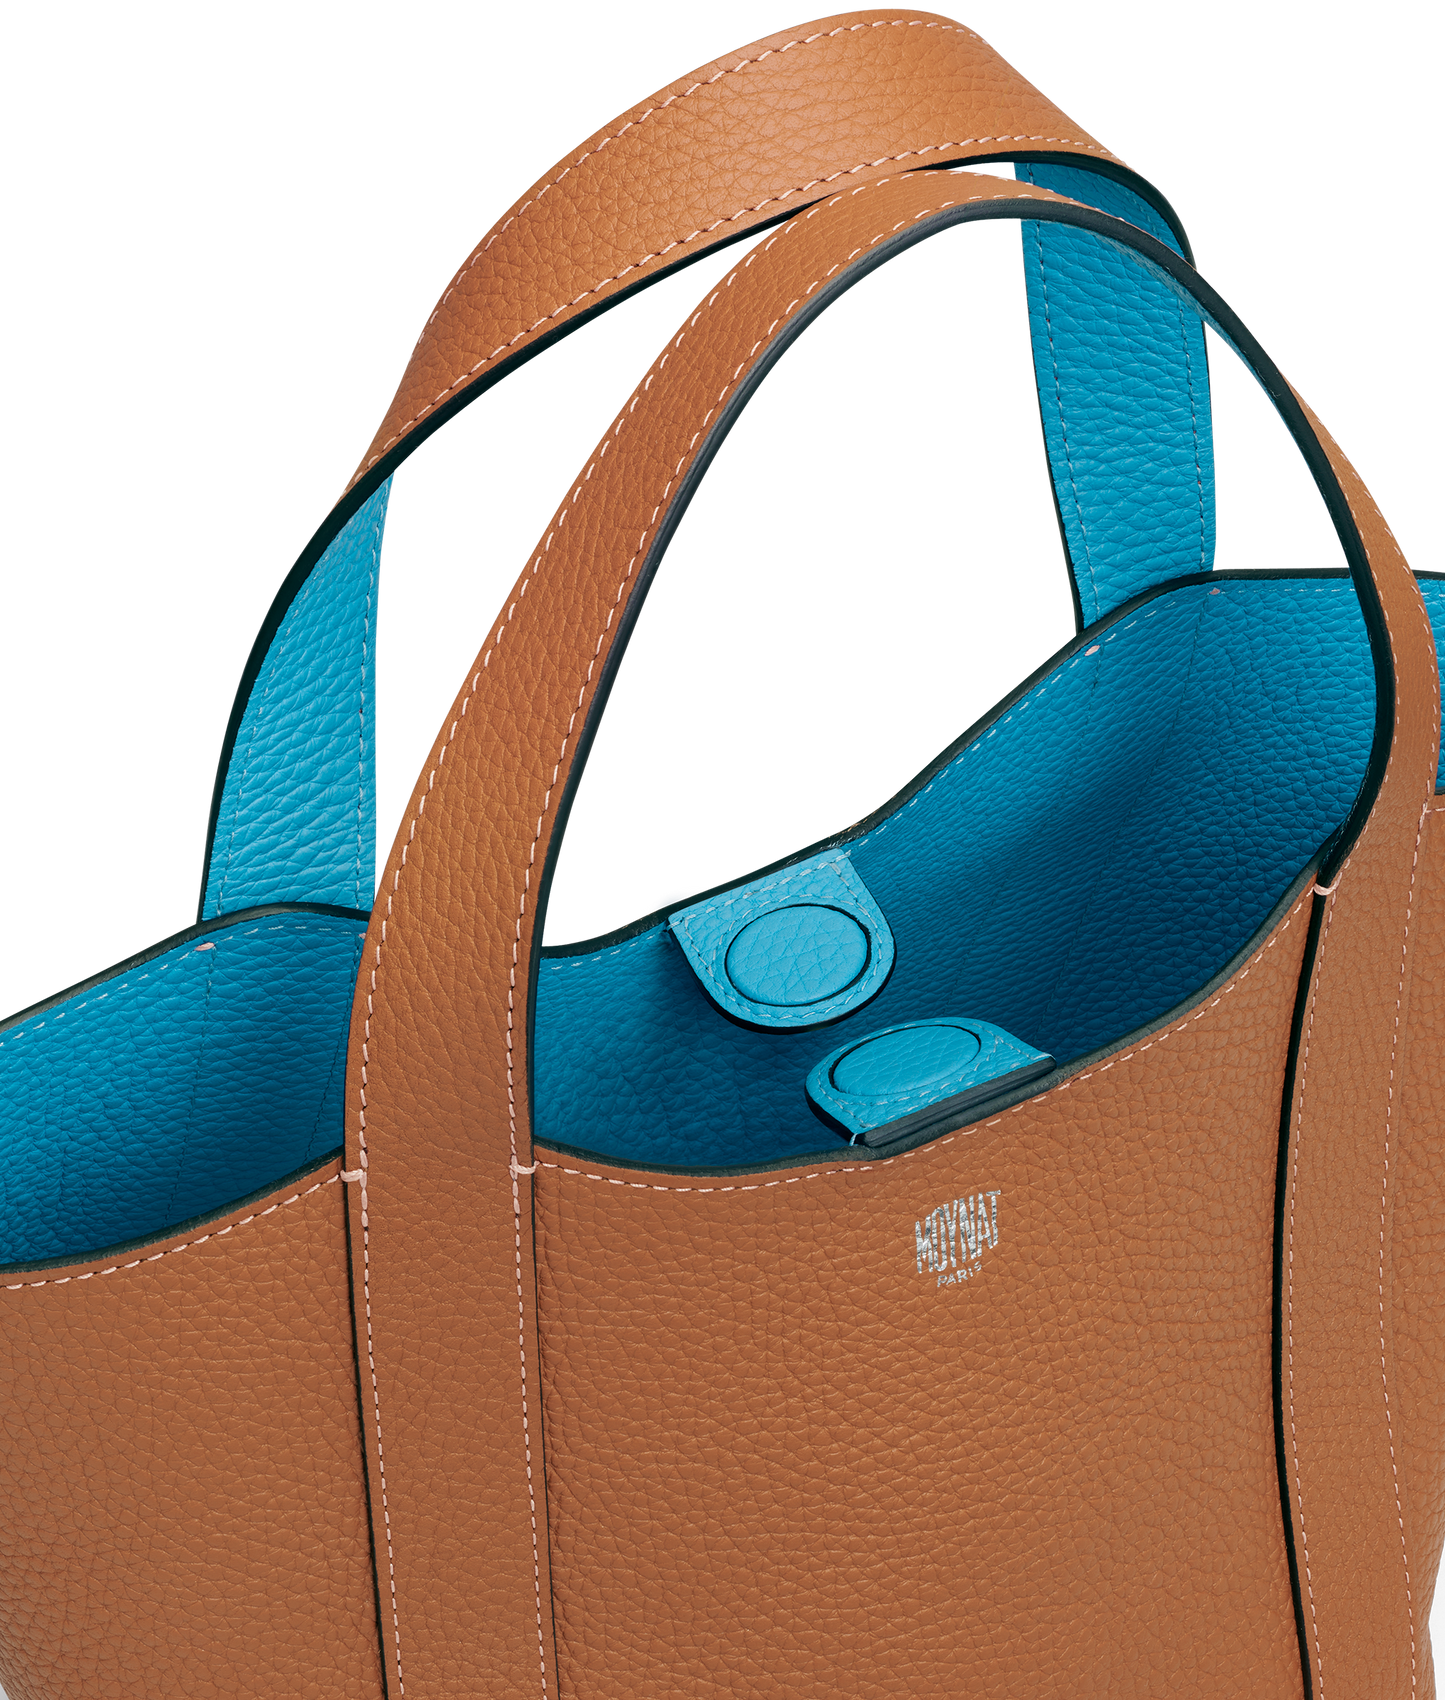 Feel tré chic and effortless with this Moynat Ruban Duo MM Indigo Bronze  Cognac Tote Bag. Grab this piece of Parisian luxury only at…